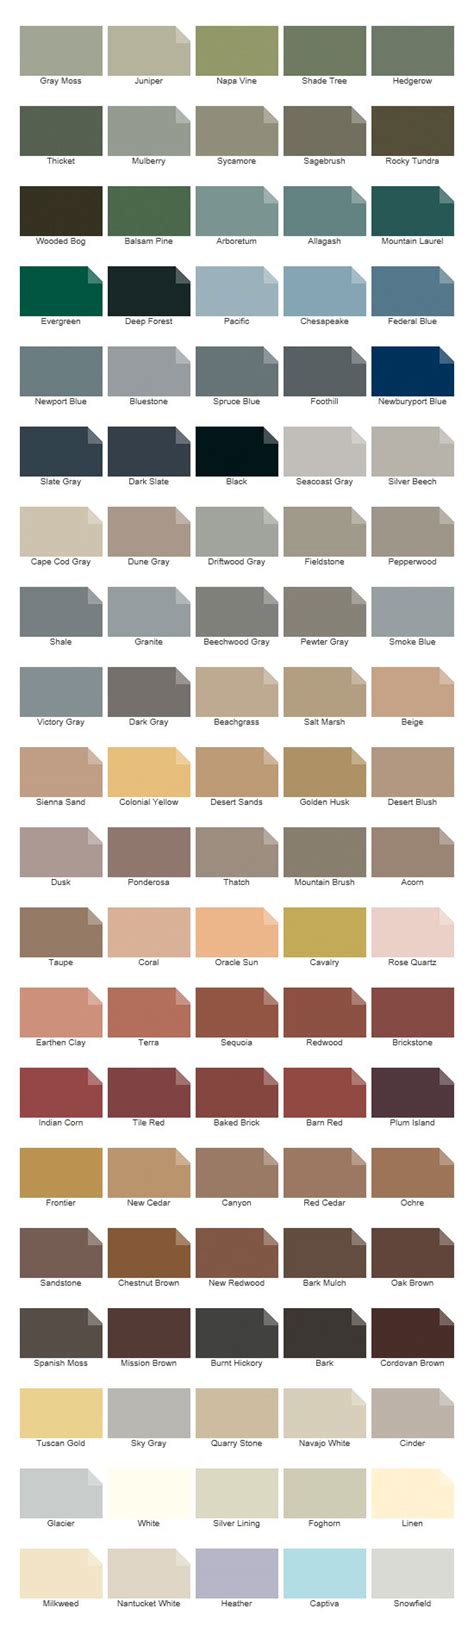 Cabot Wood Stain Color Chart